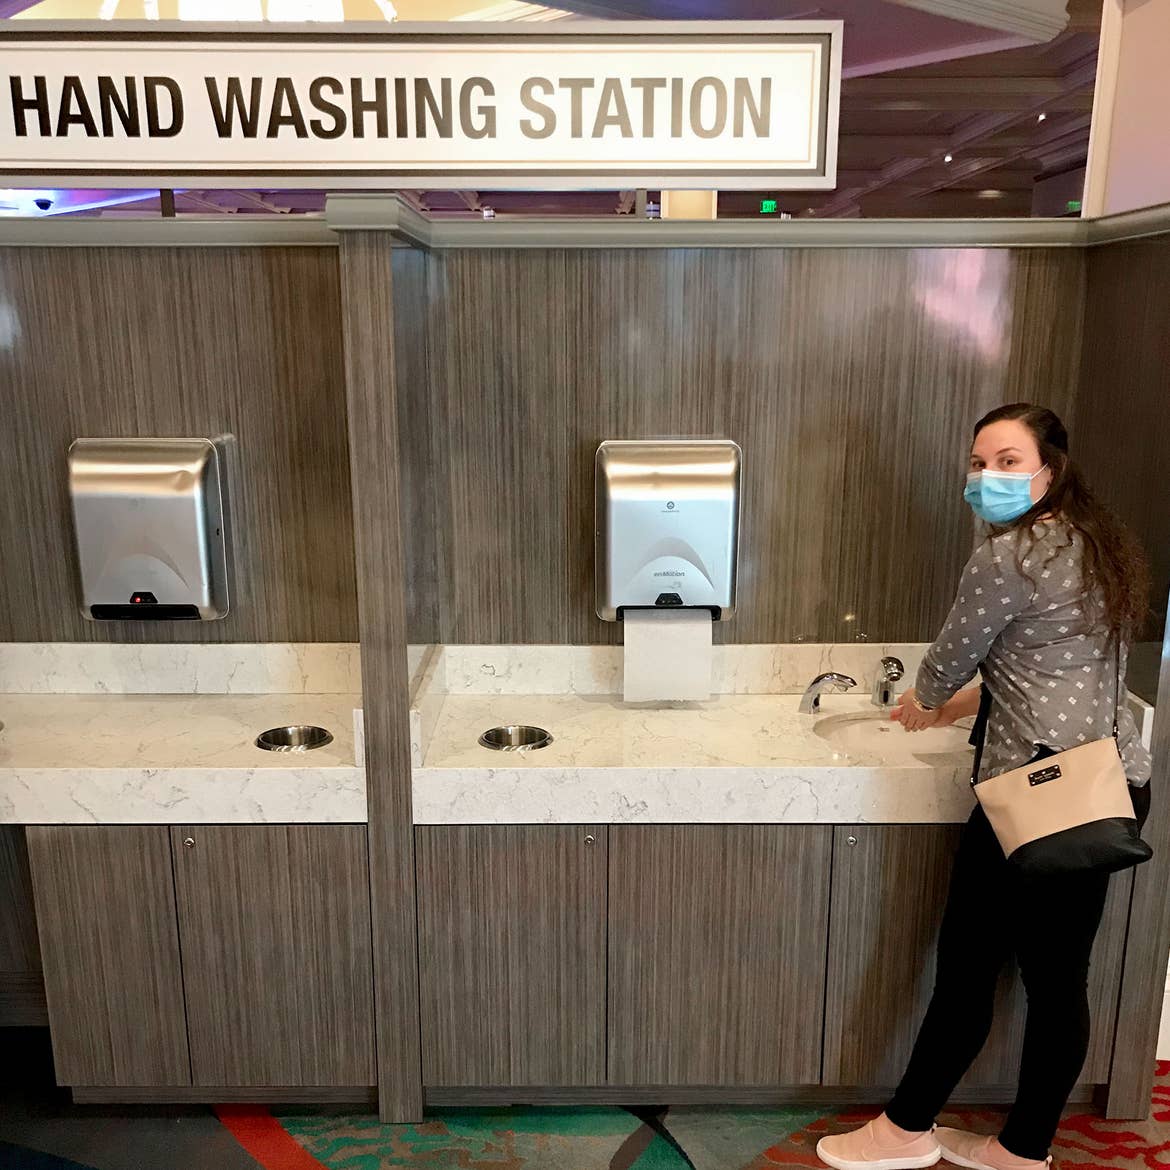 Ashley washes her hands at a 'Hand Washing Station' on the main floor of the casino.